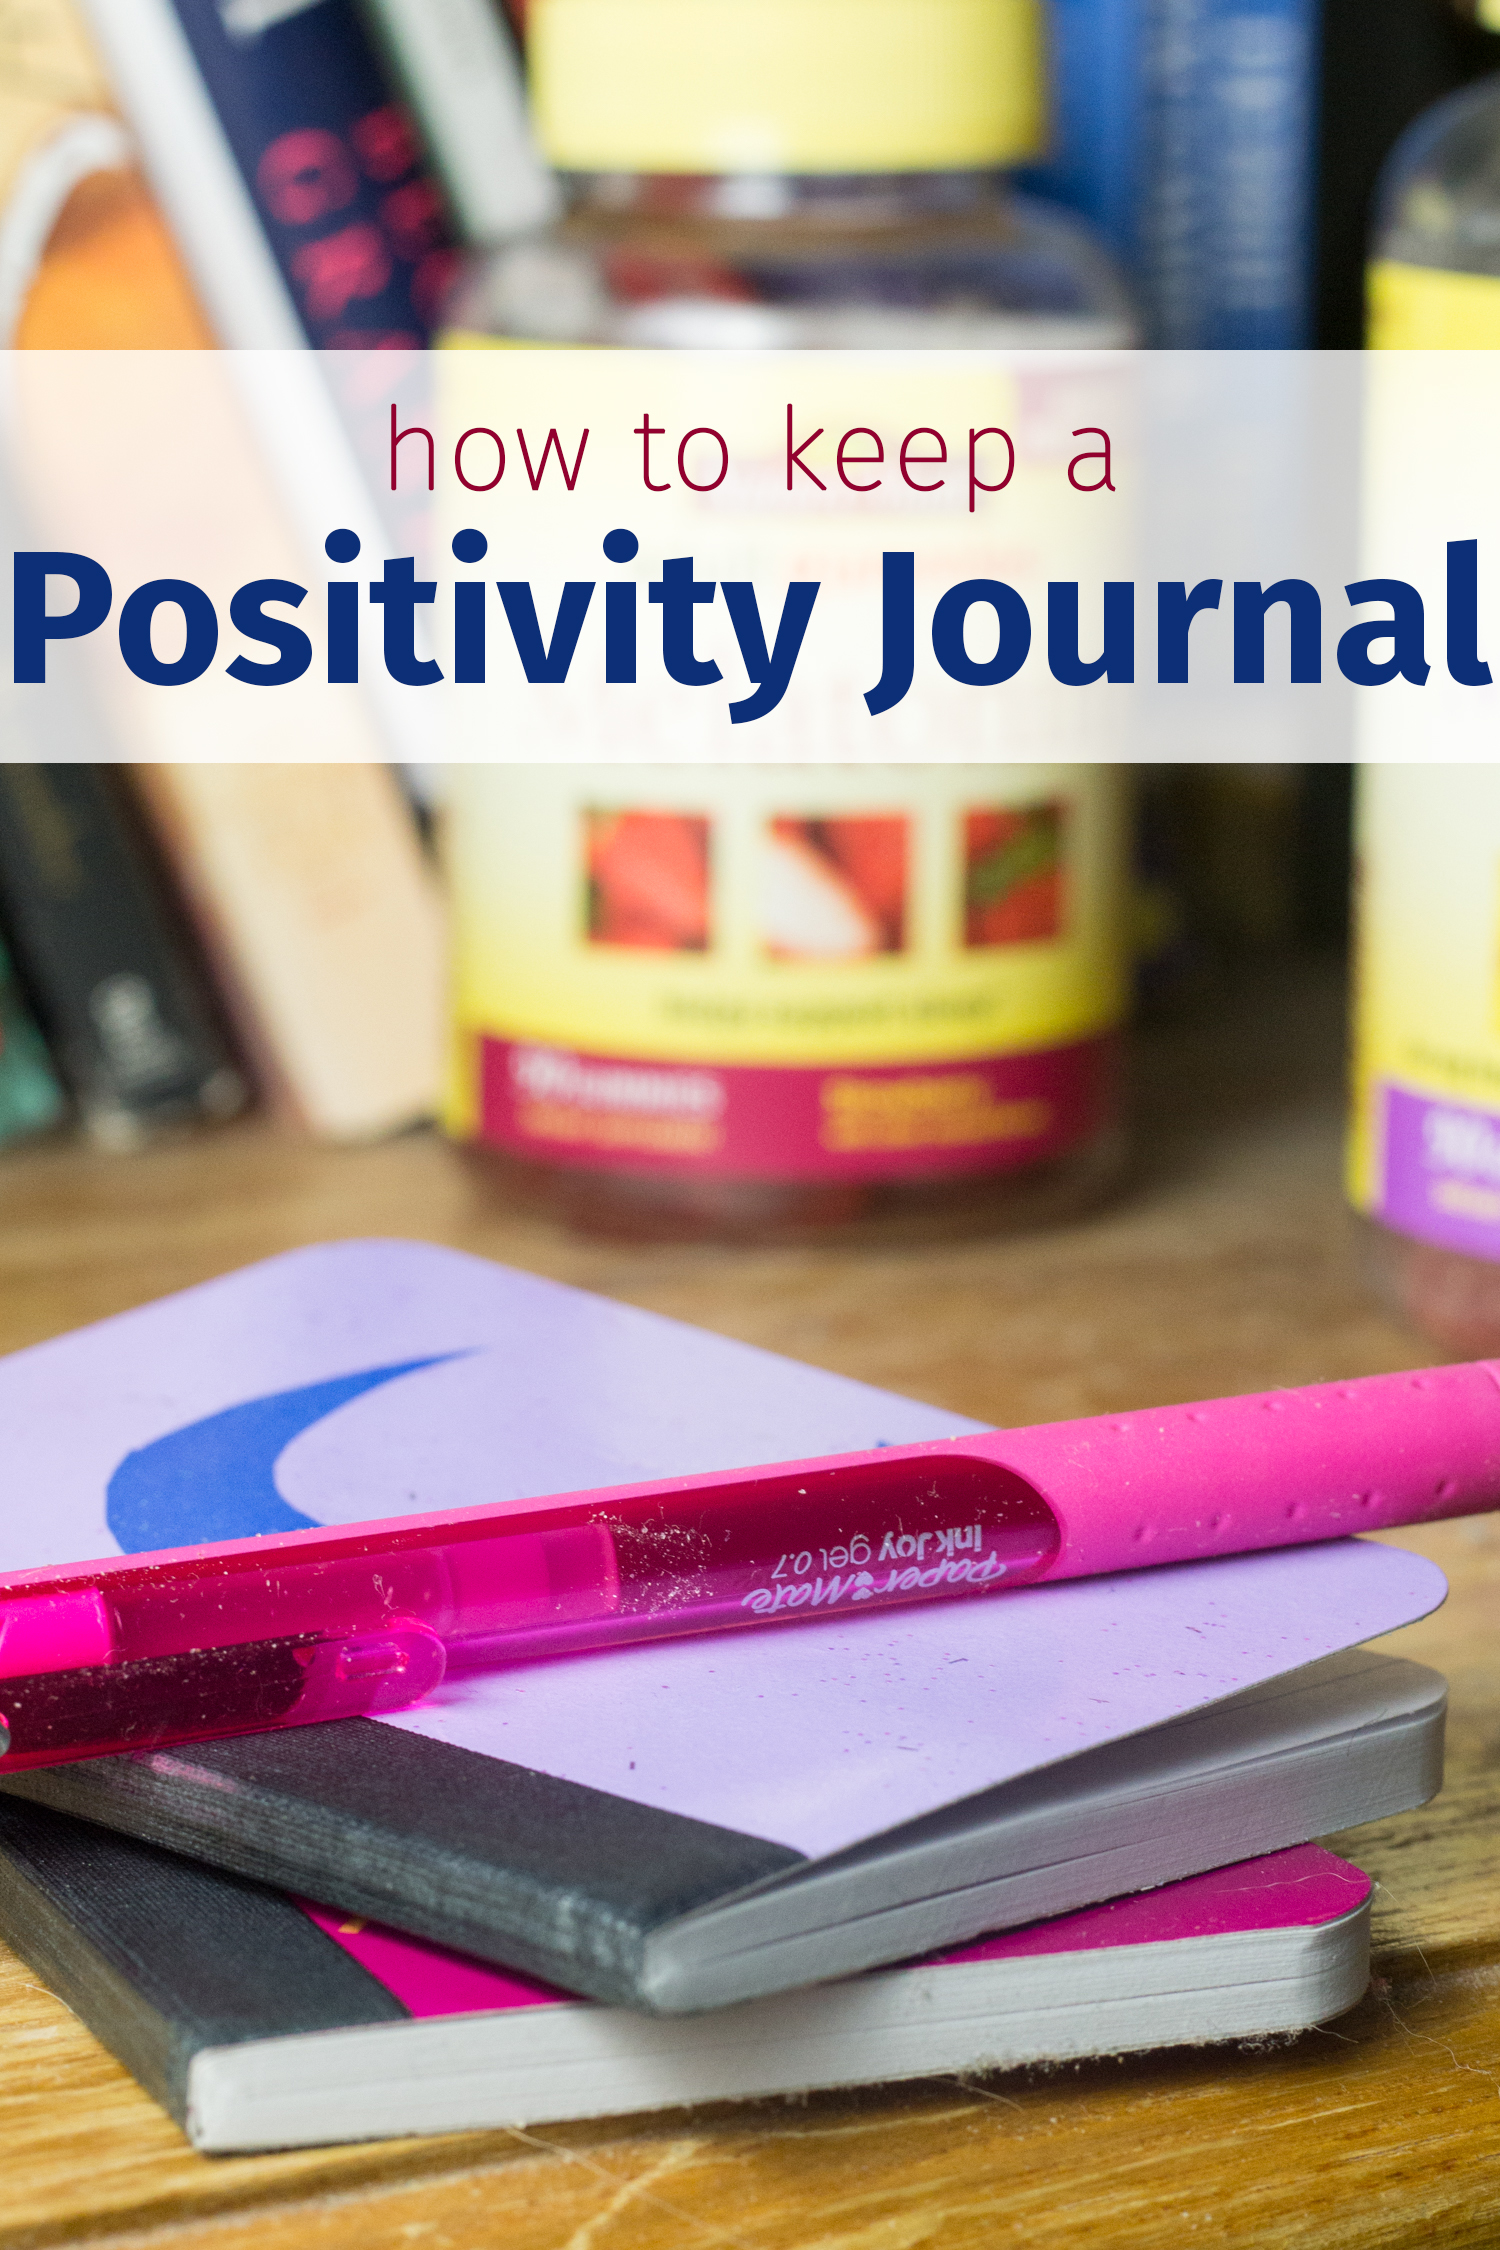 Starting your day with positivity is important to a healthy lifestyle. We often talk about the importance of positive physical health -- good diet, exercise, making sure to take your Nature Made vitamins -- but mental health is important, too! Here's how to make (and keep!) a positivity journal that can help you focus on the good stuff (plus tips on sleep journaling to start your day off right). #NatureMadeGummies [ad]